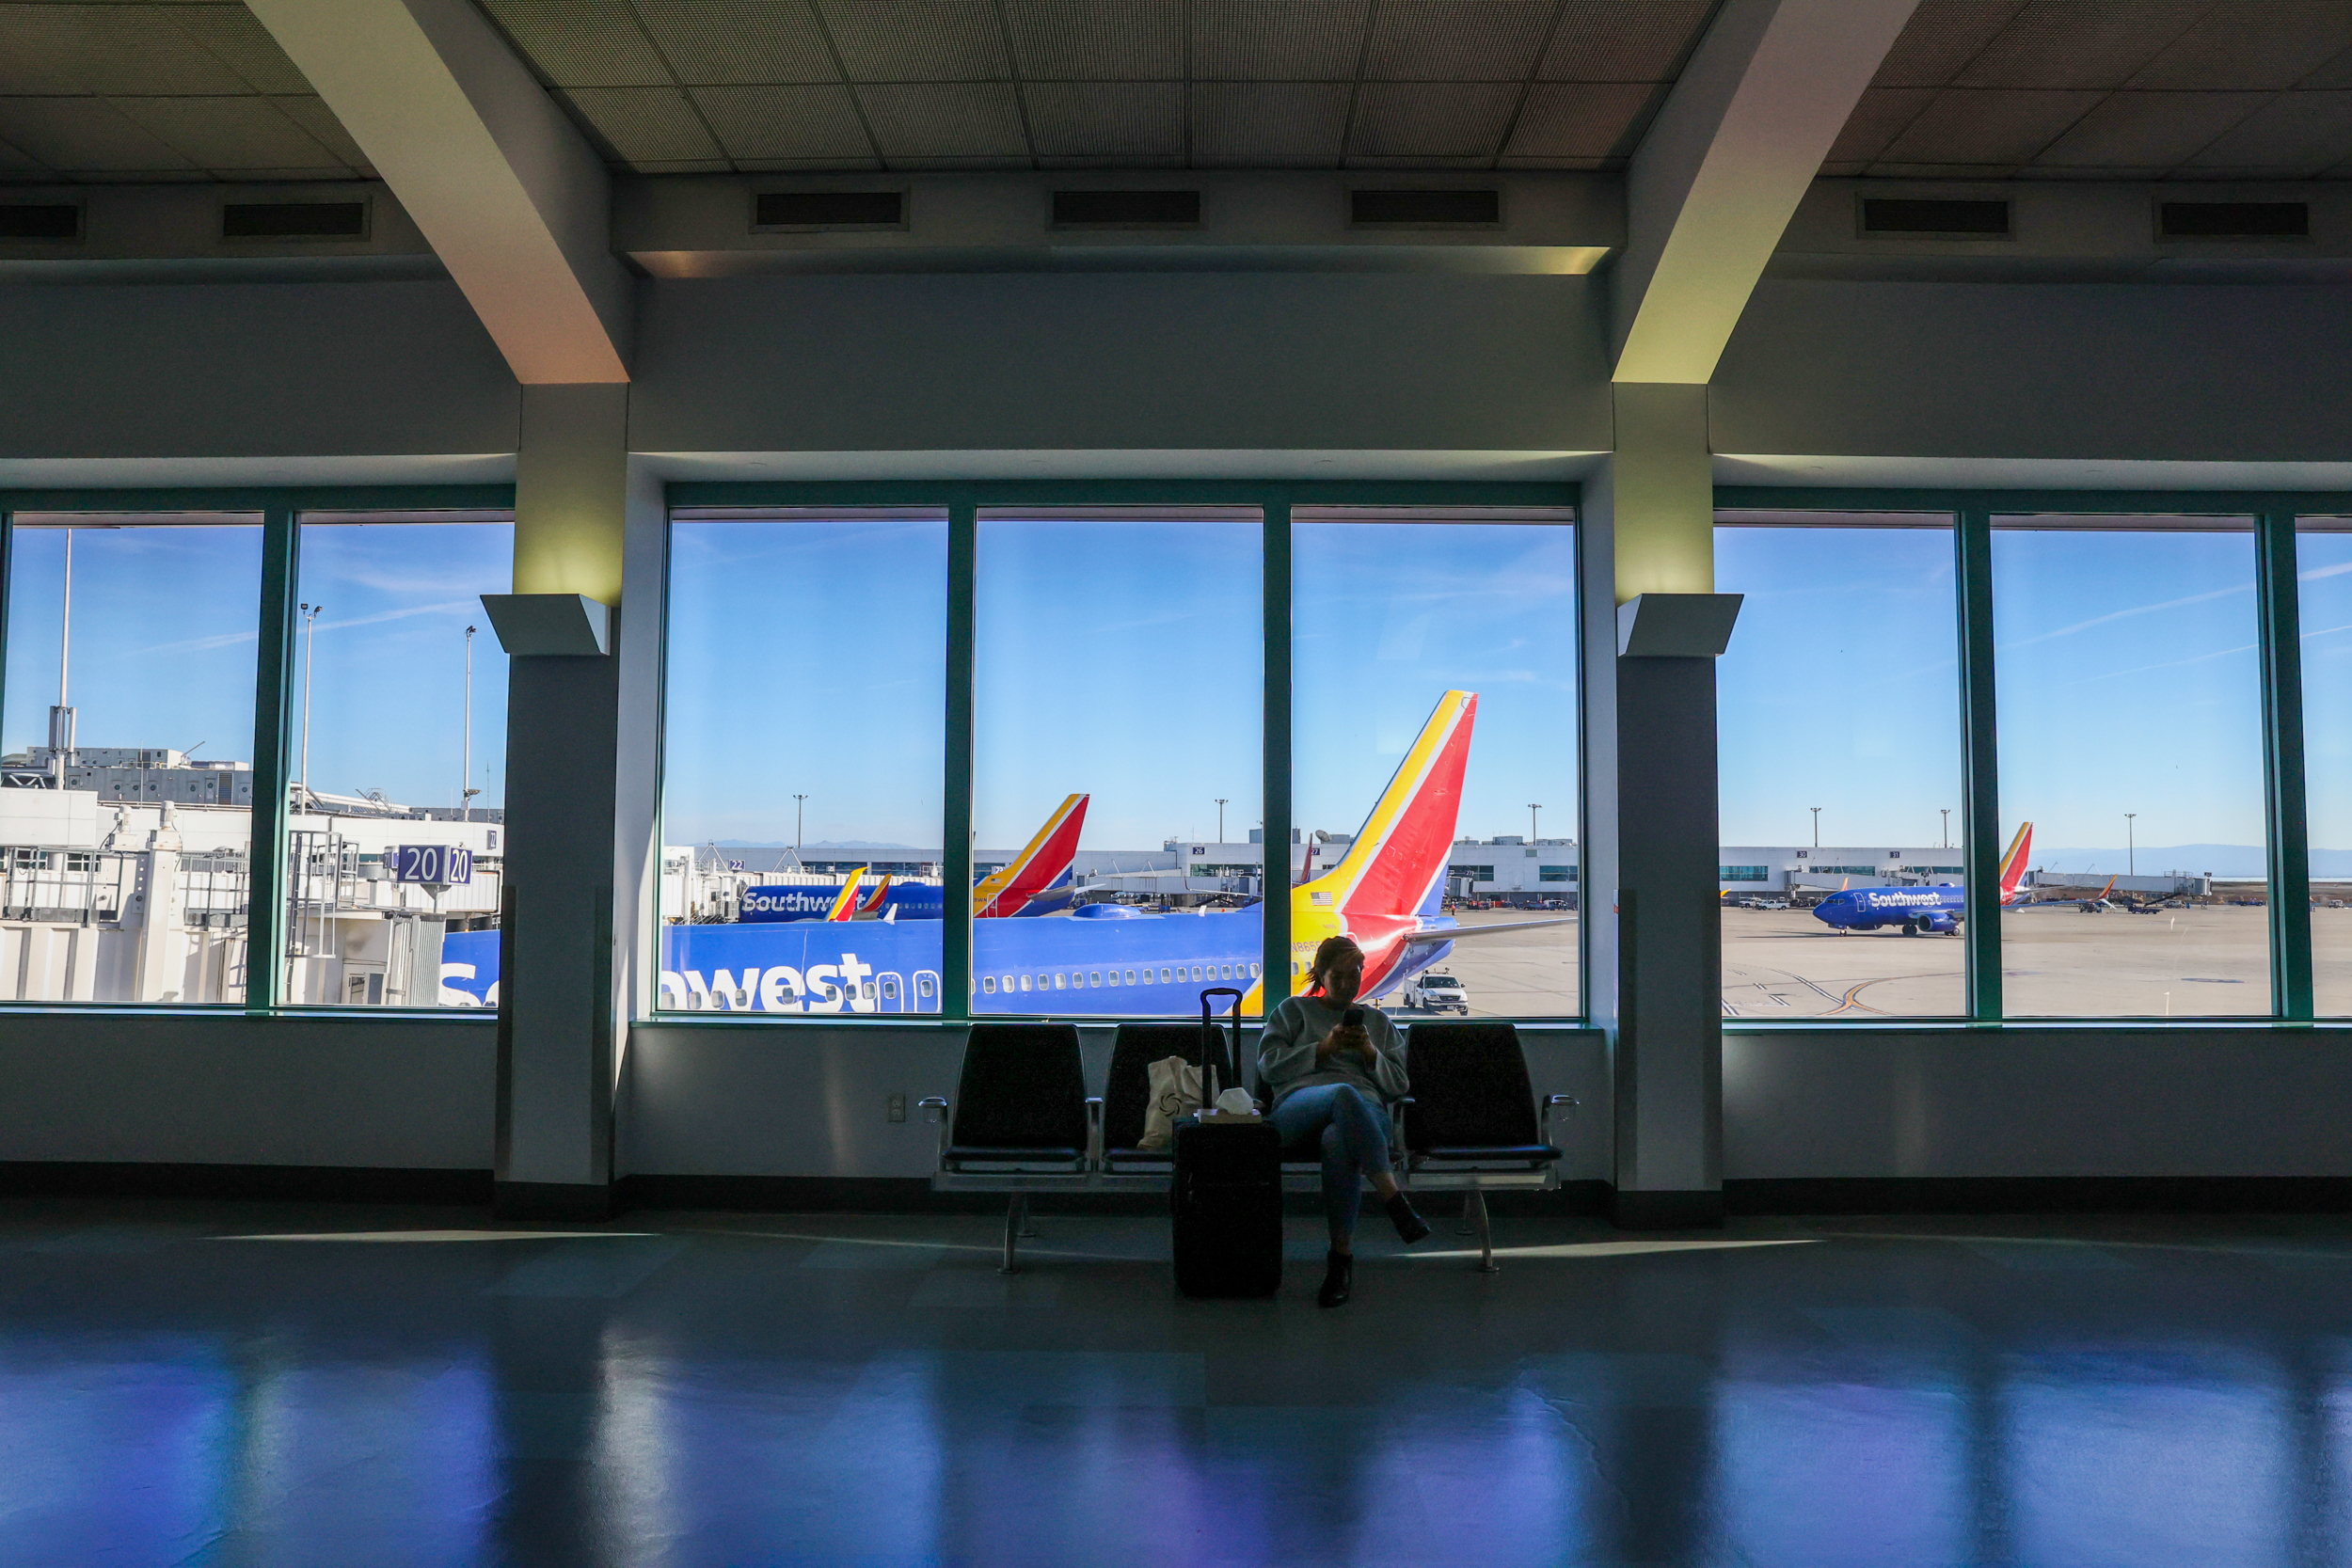 An airport waiting area with passengers and view of parked planes through windows.